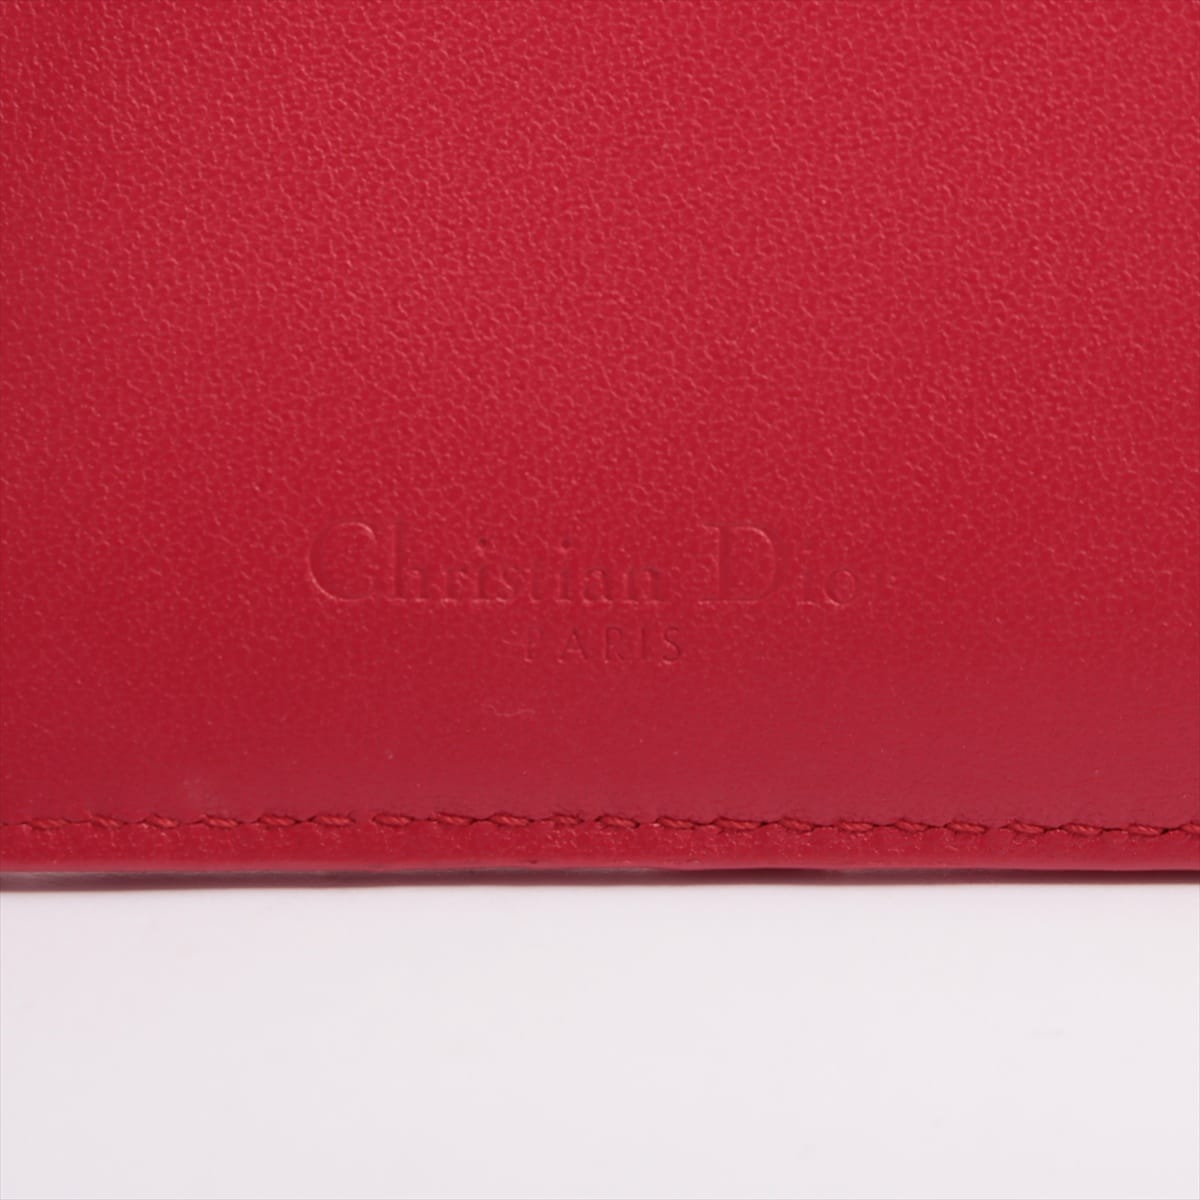 Christian Dior Lady Dior Cannage Leather Pass case Red